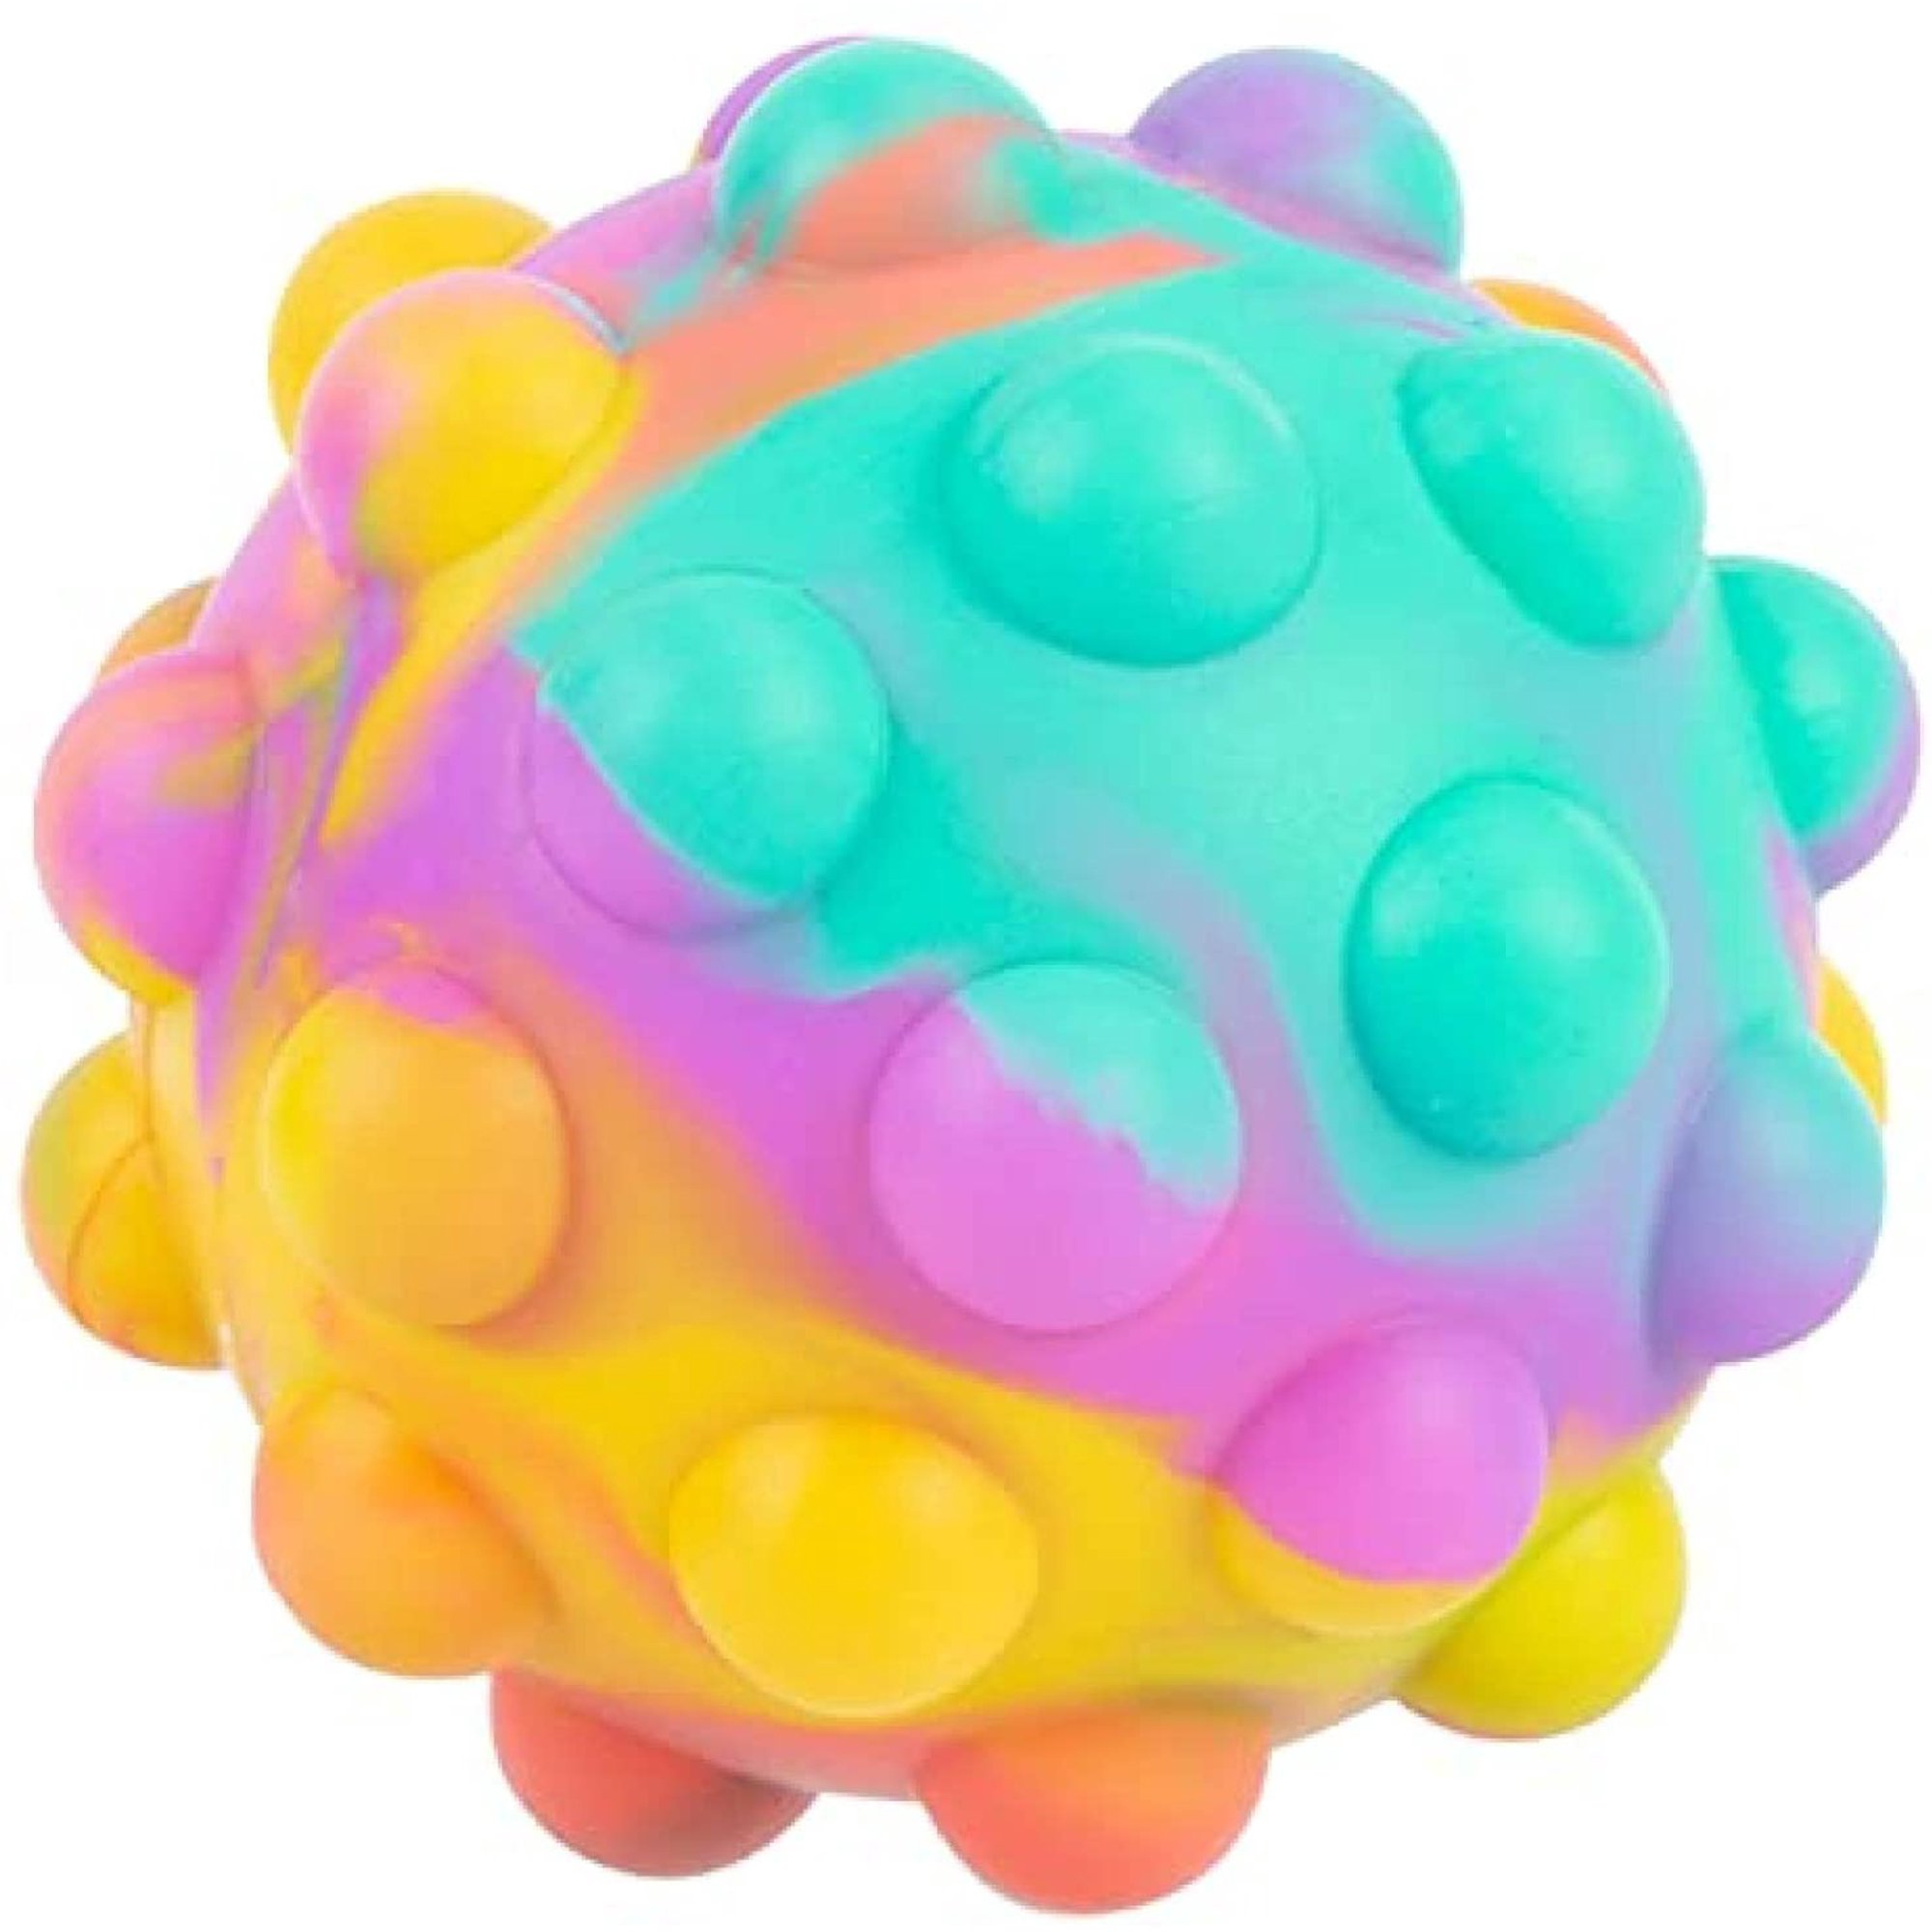 Pop Ball Squishy Fidget Toy 3D Squeeze Stress Balls with Popping Noises Portable Sensory Early Education Intellectual Brain Decompression Toys 2 Pack Green + Blue 